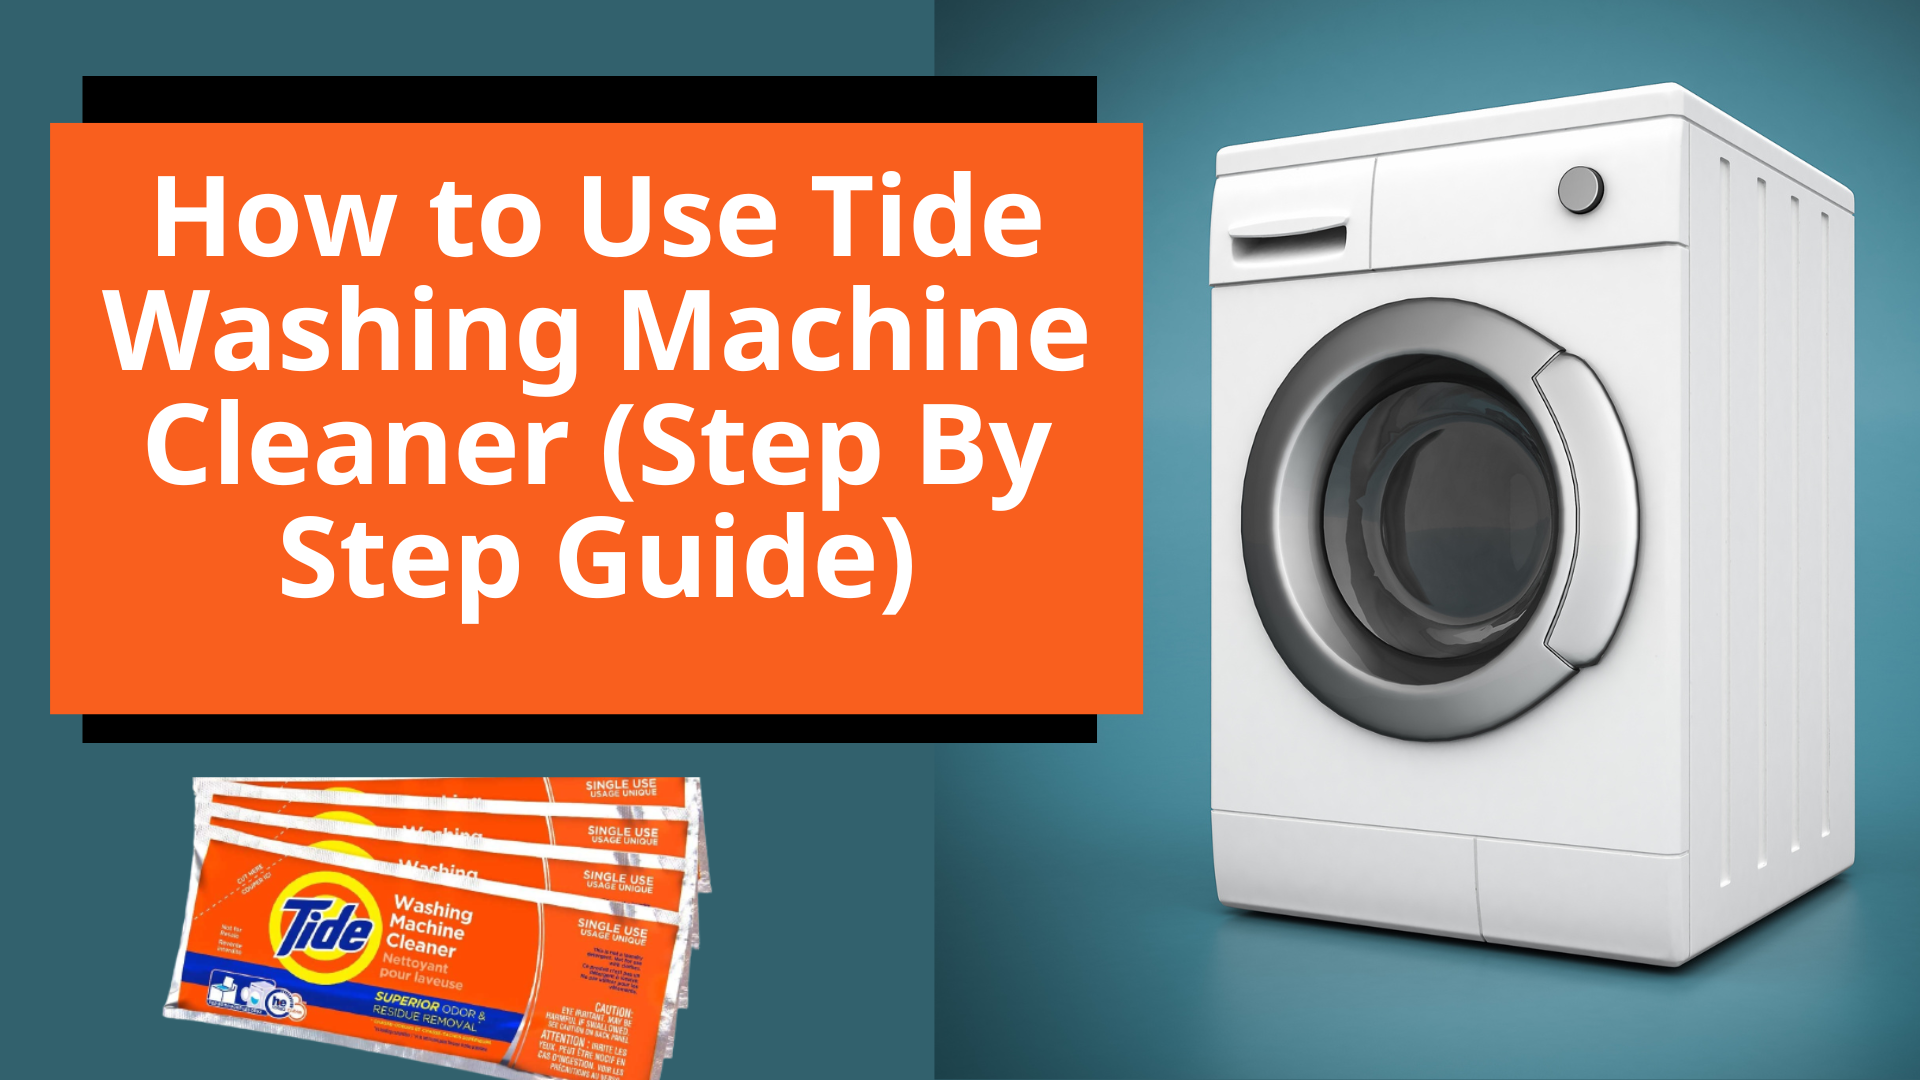 How to Use Tide Washing Machine Cleaner (Step By Step Guide)